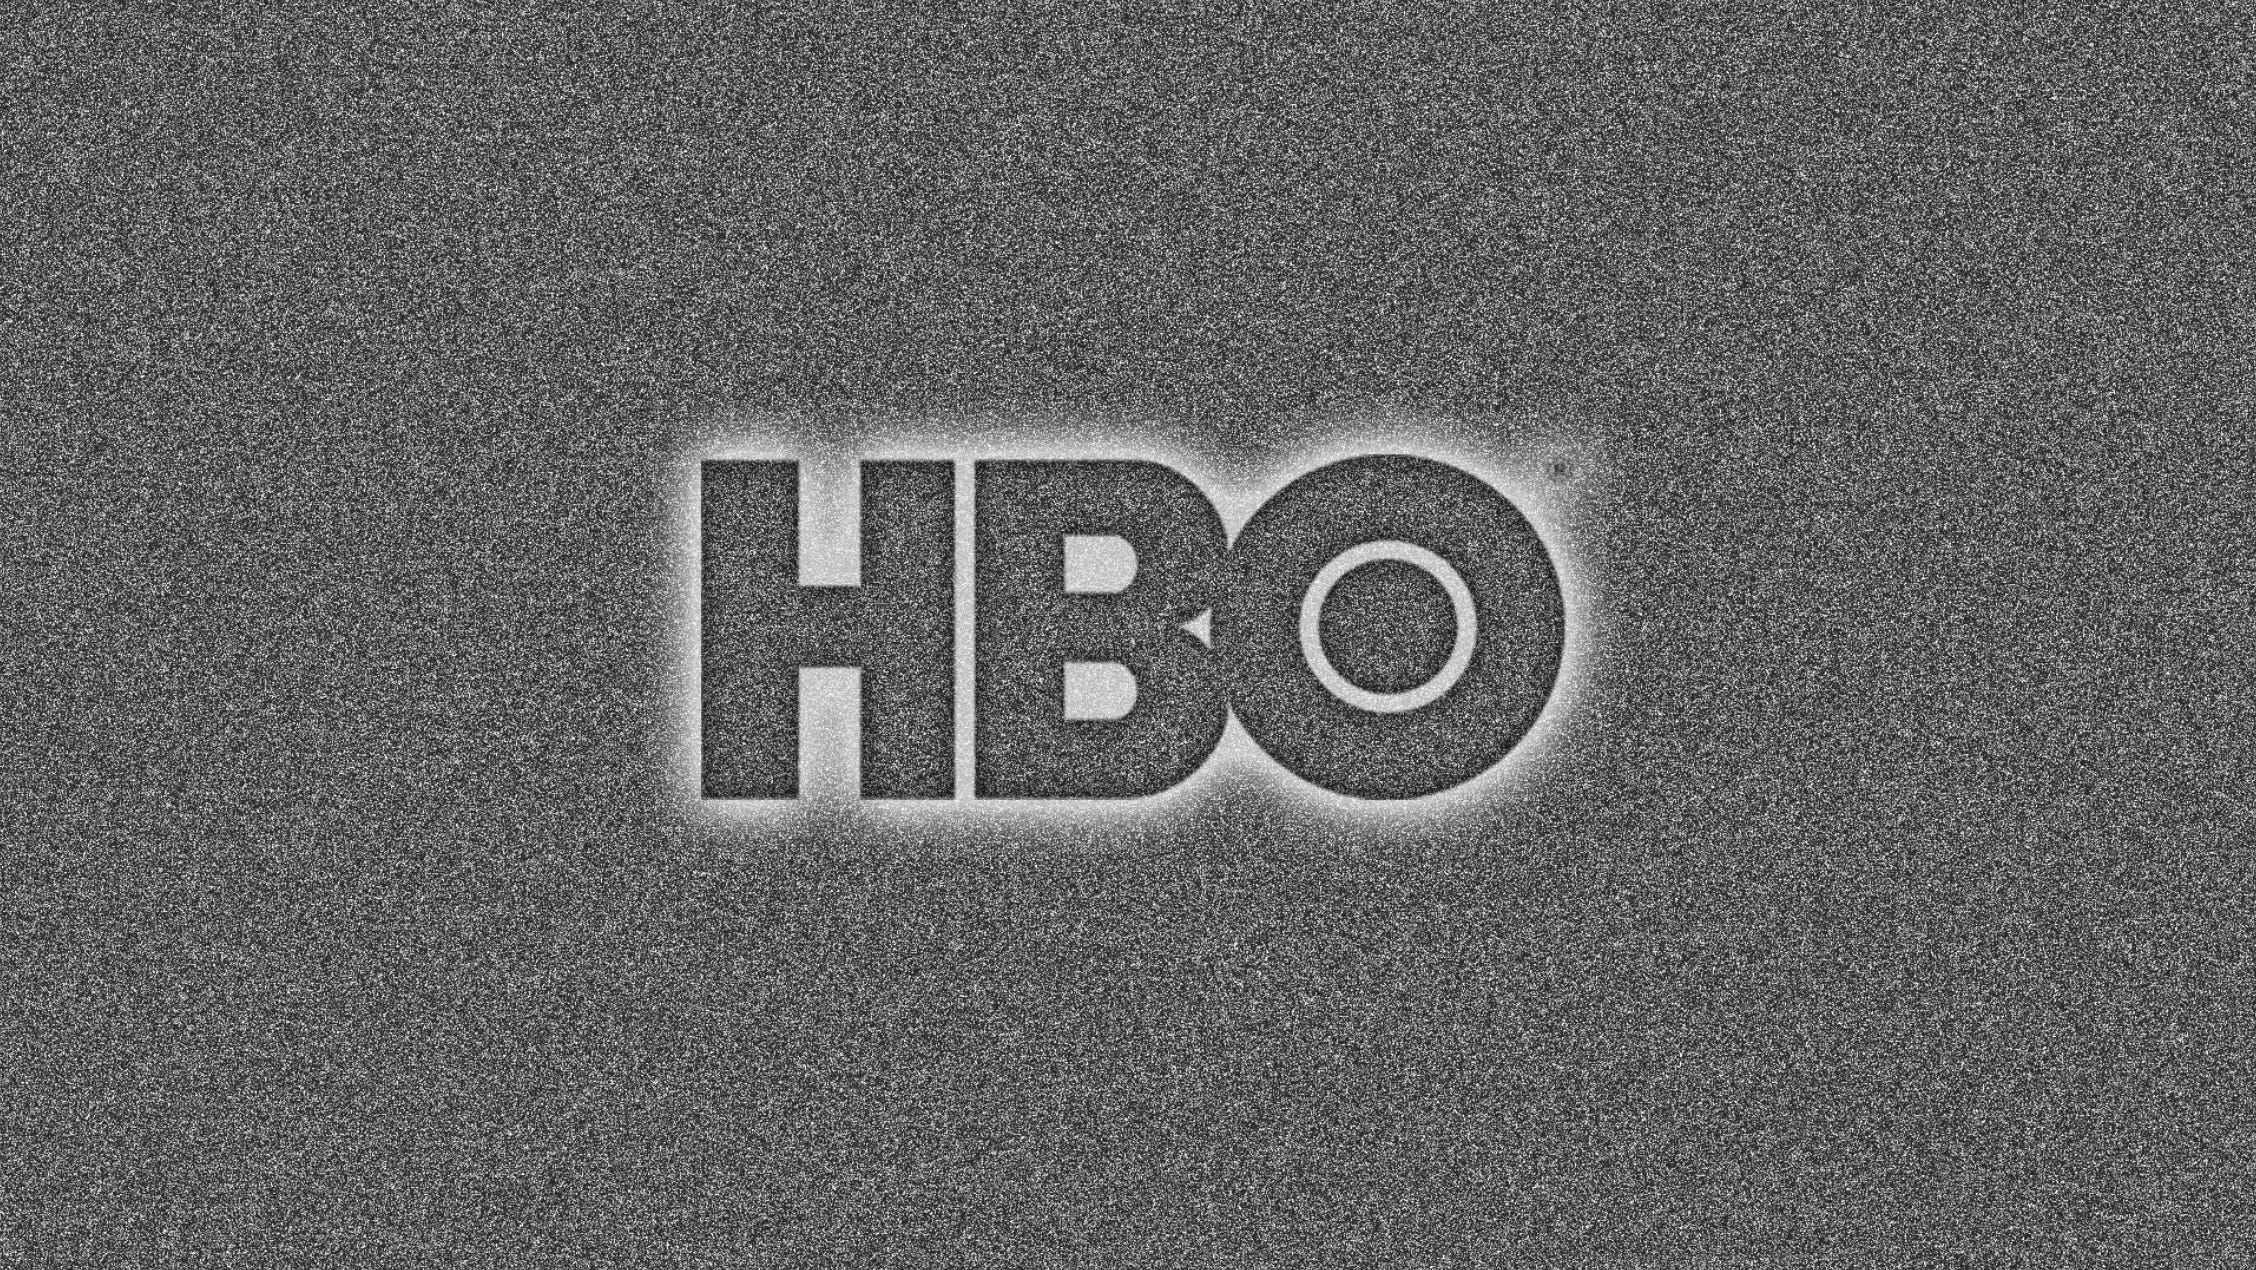 What Does HBO Max's Launch Mean For Convergent TV? - Cross Screen Media